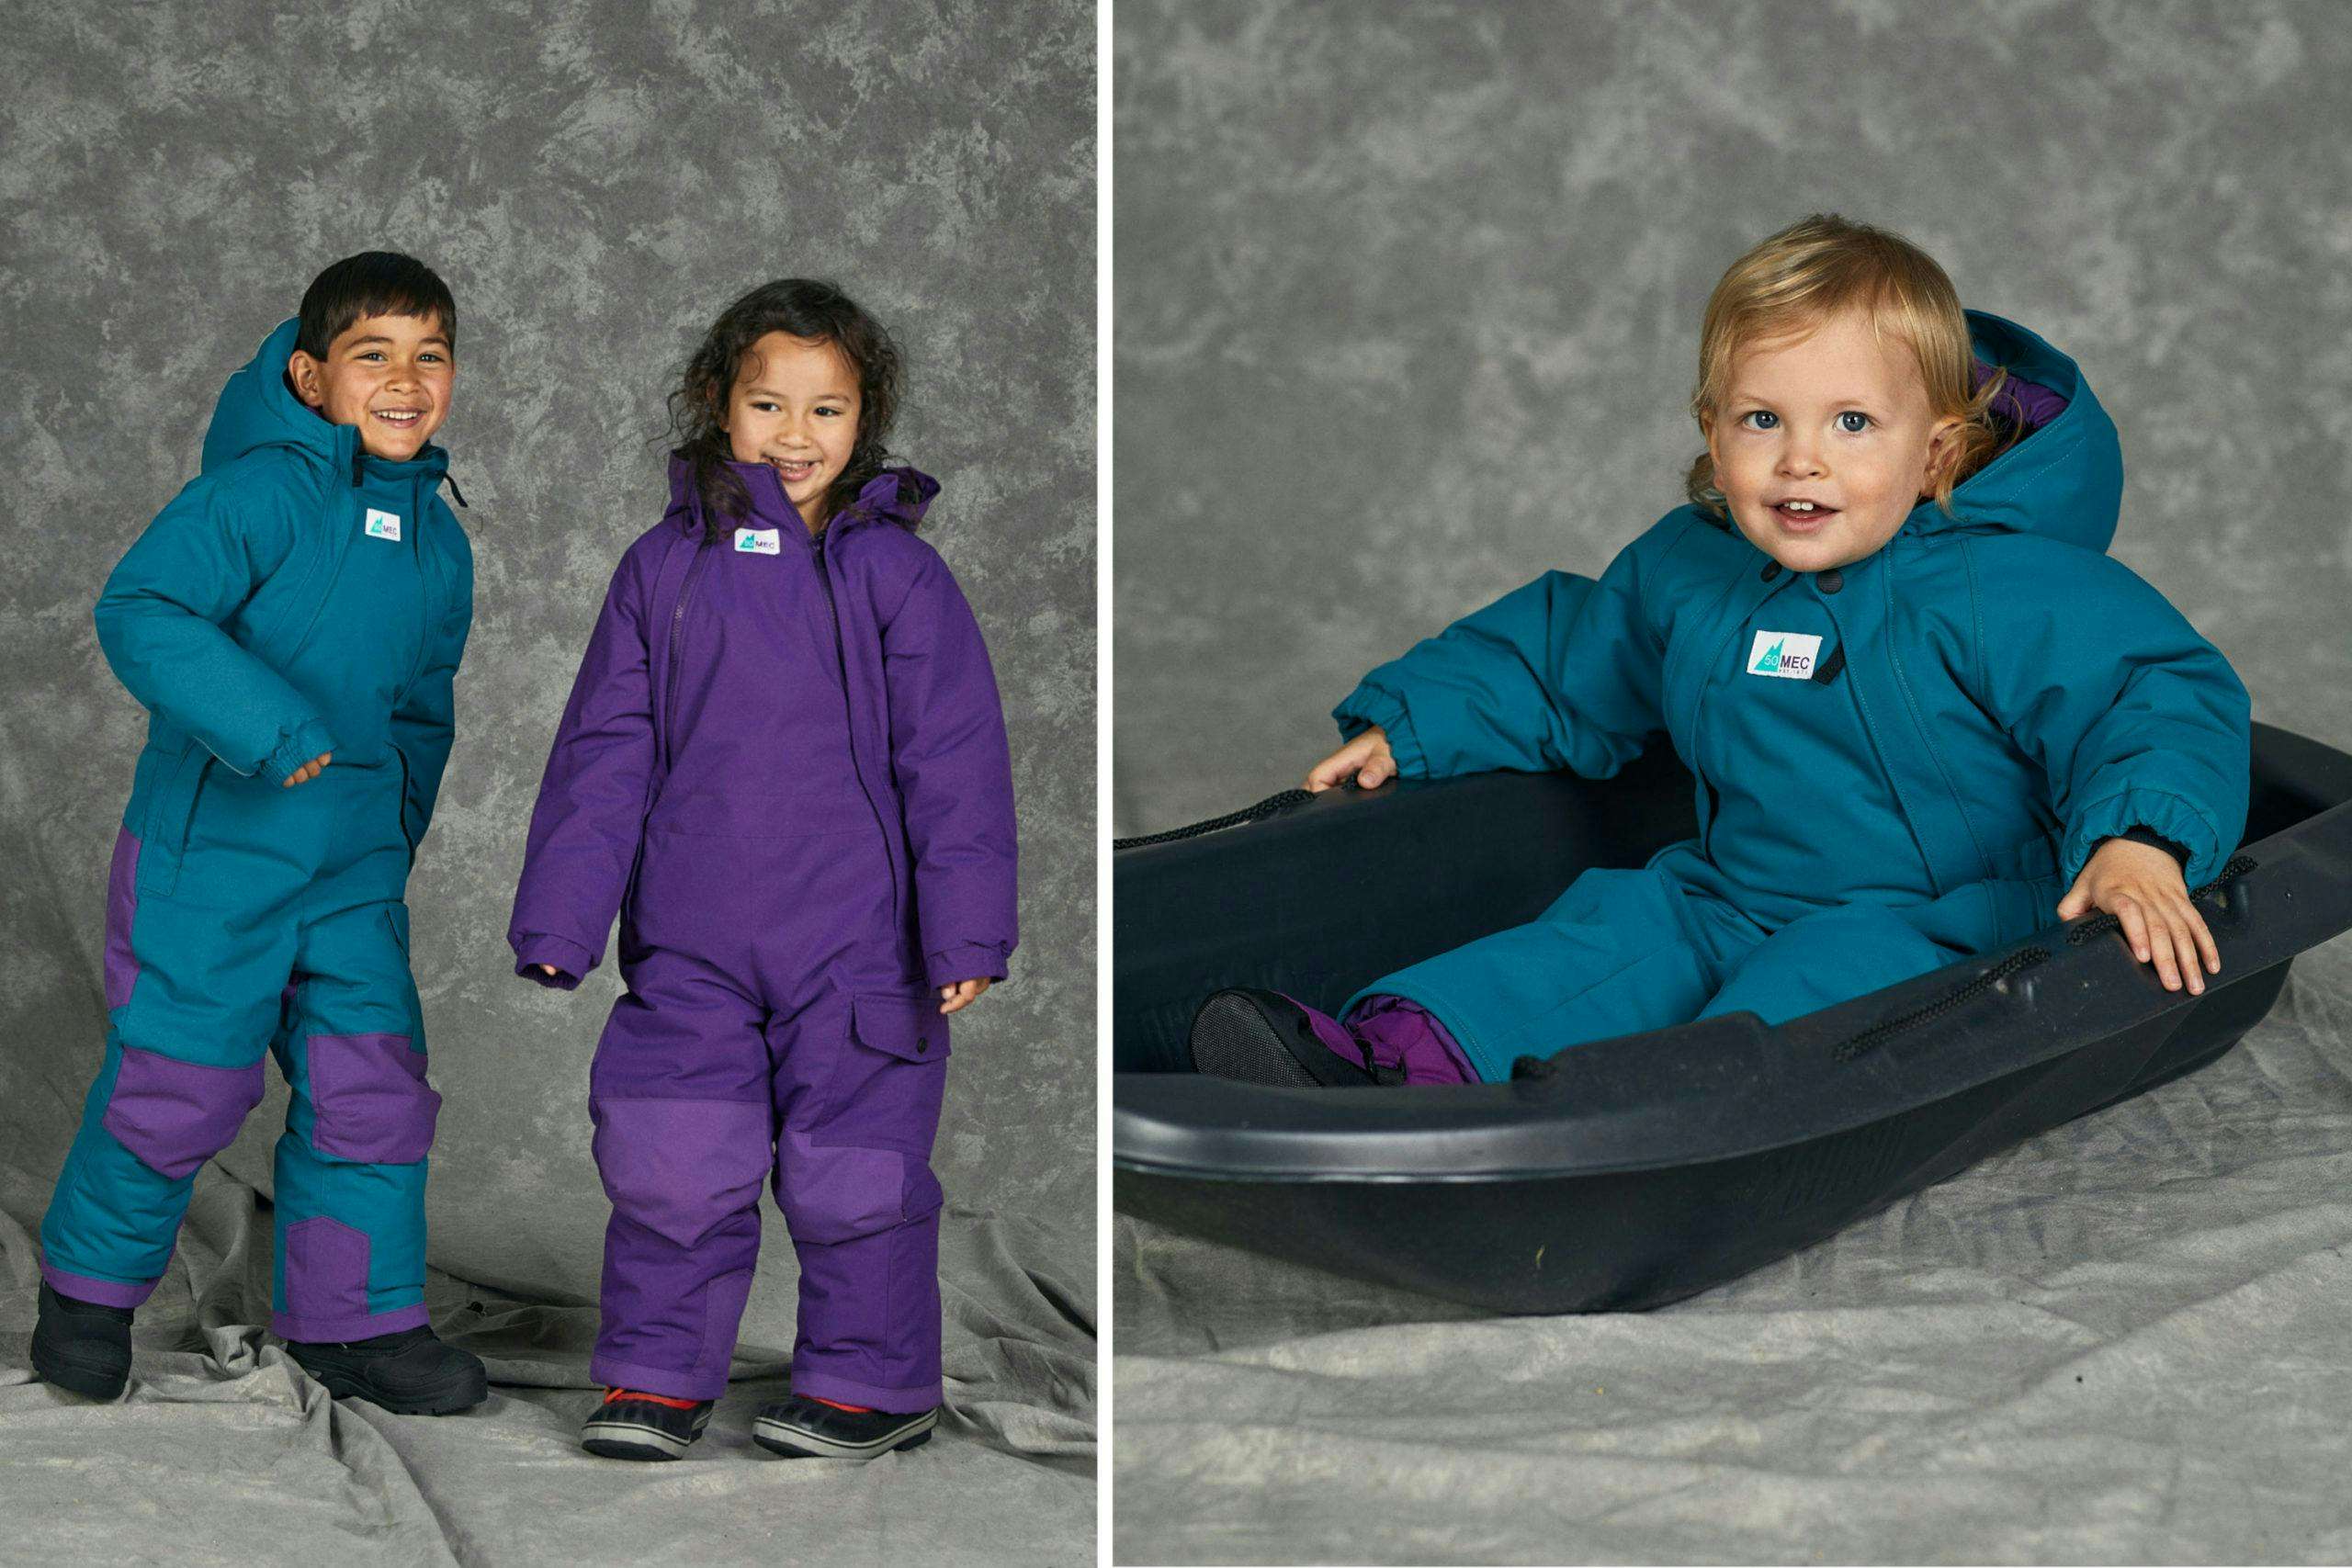 Kids wearing insulated toaster suits in teal and purple